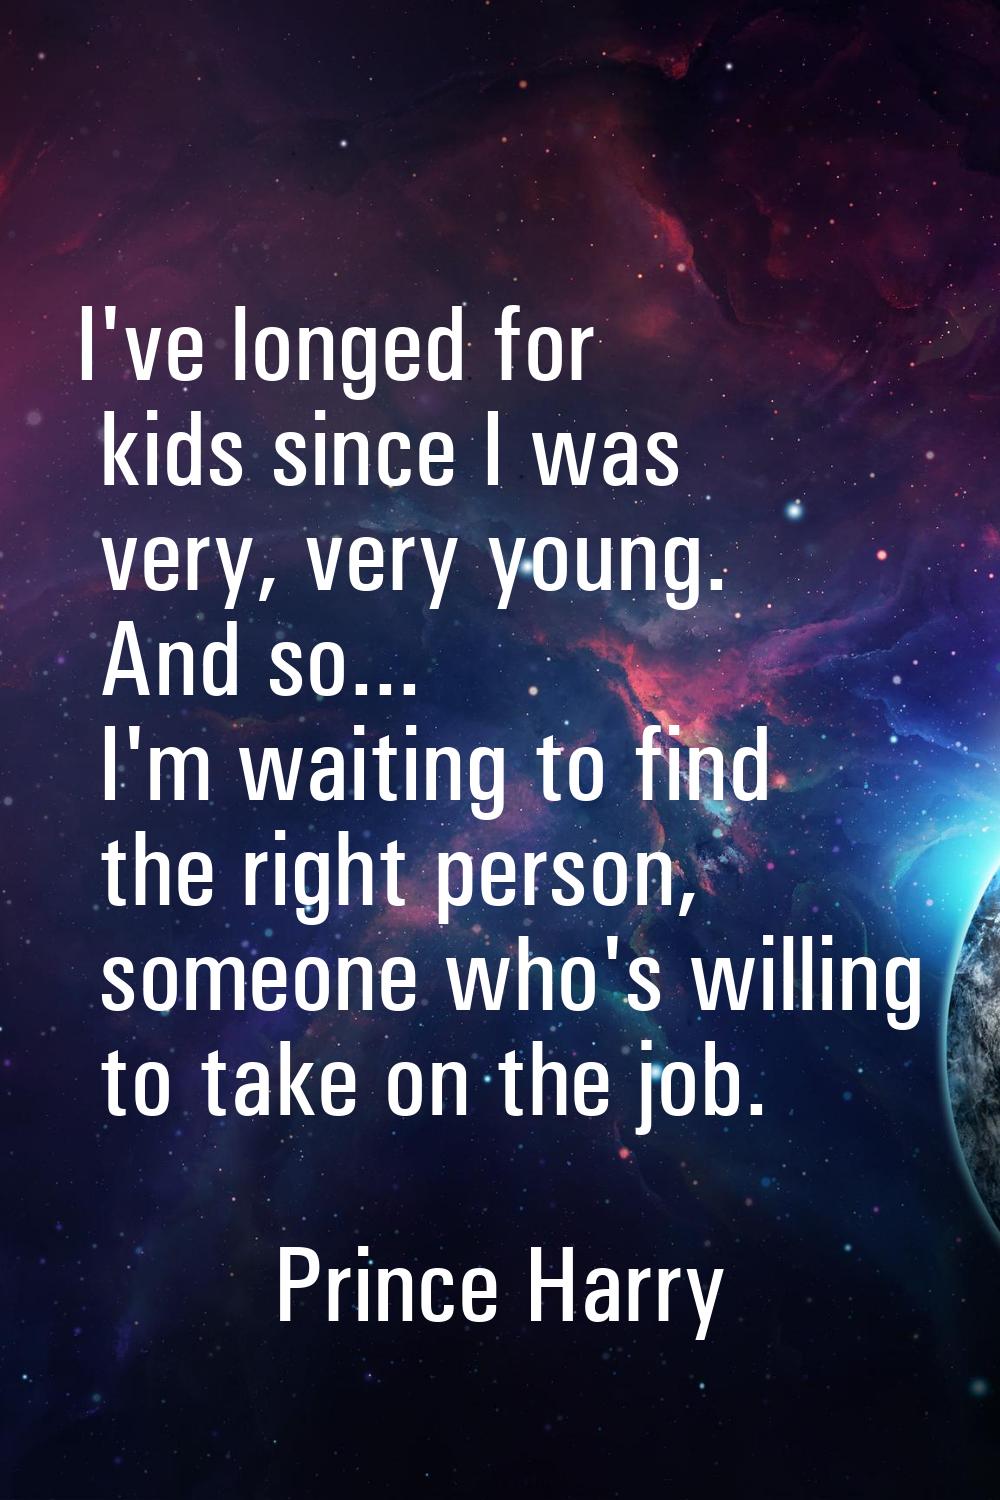 I've longed for kids since I was very, very young. And so... I'm waiting to find the right person, 